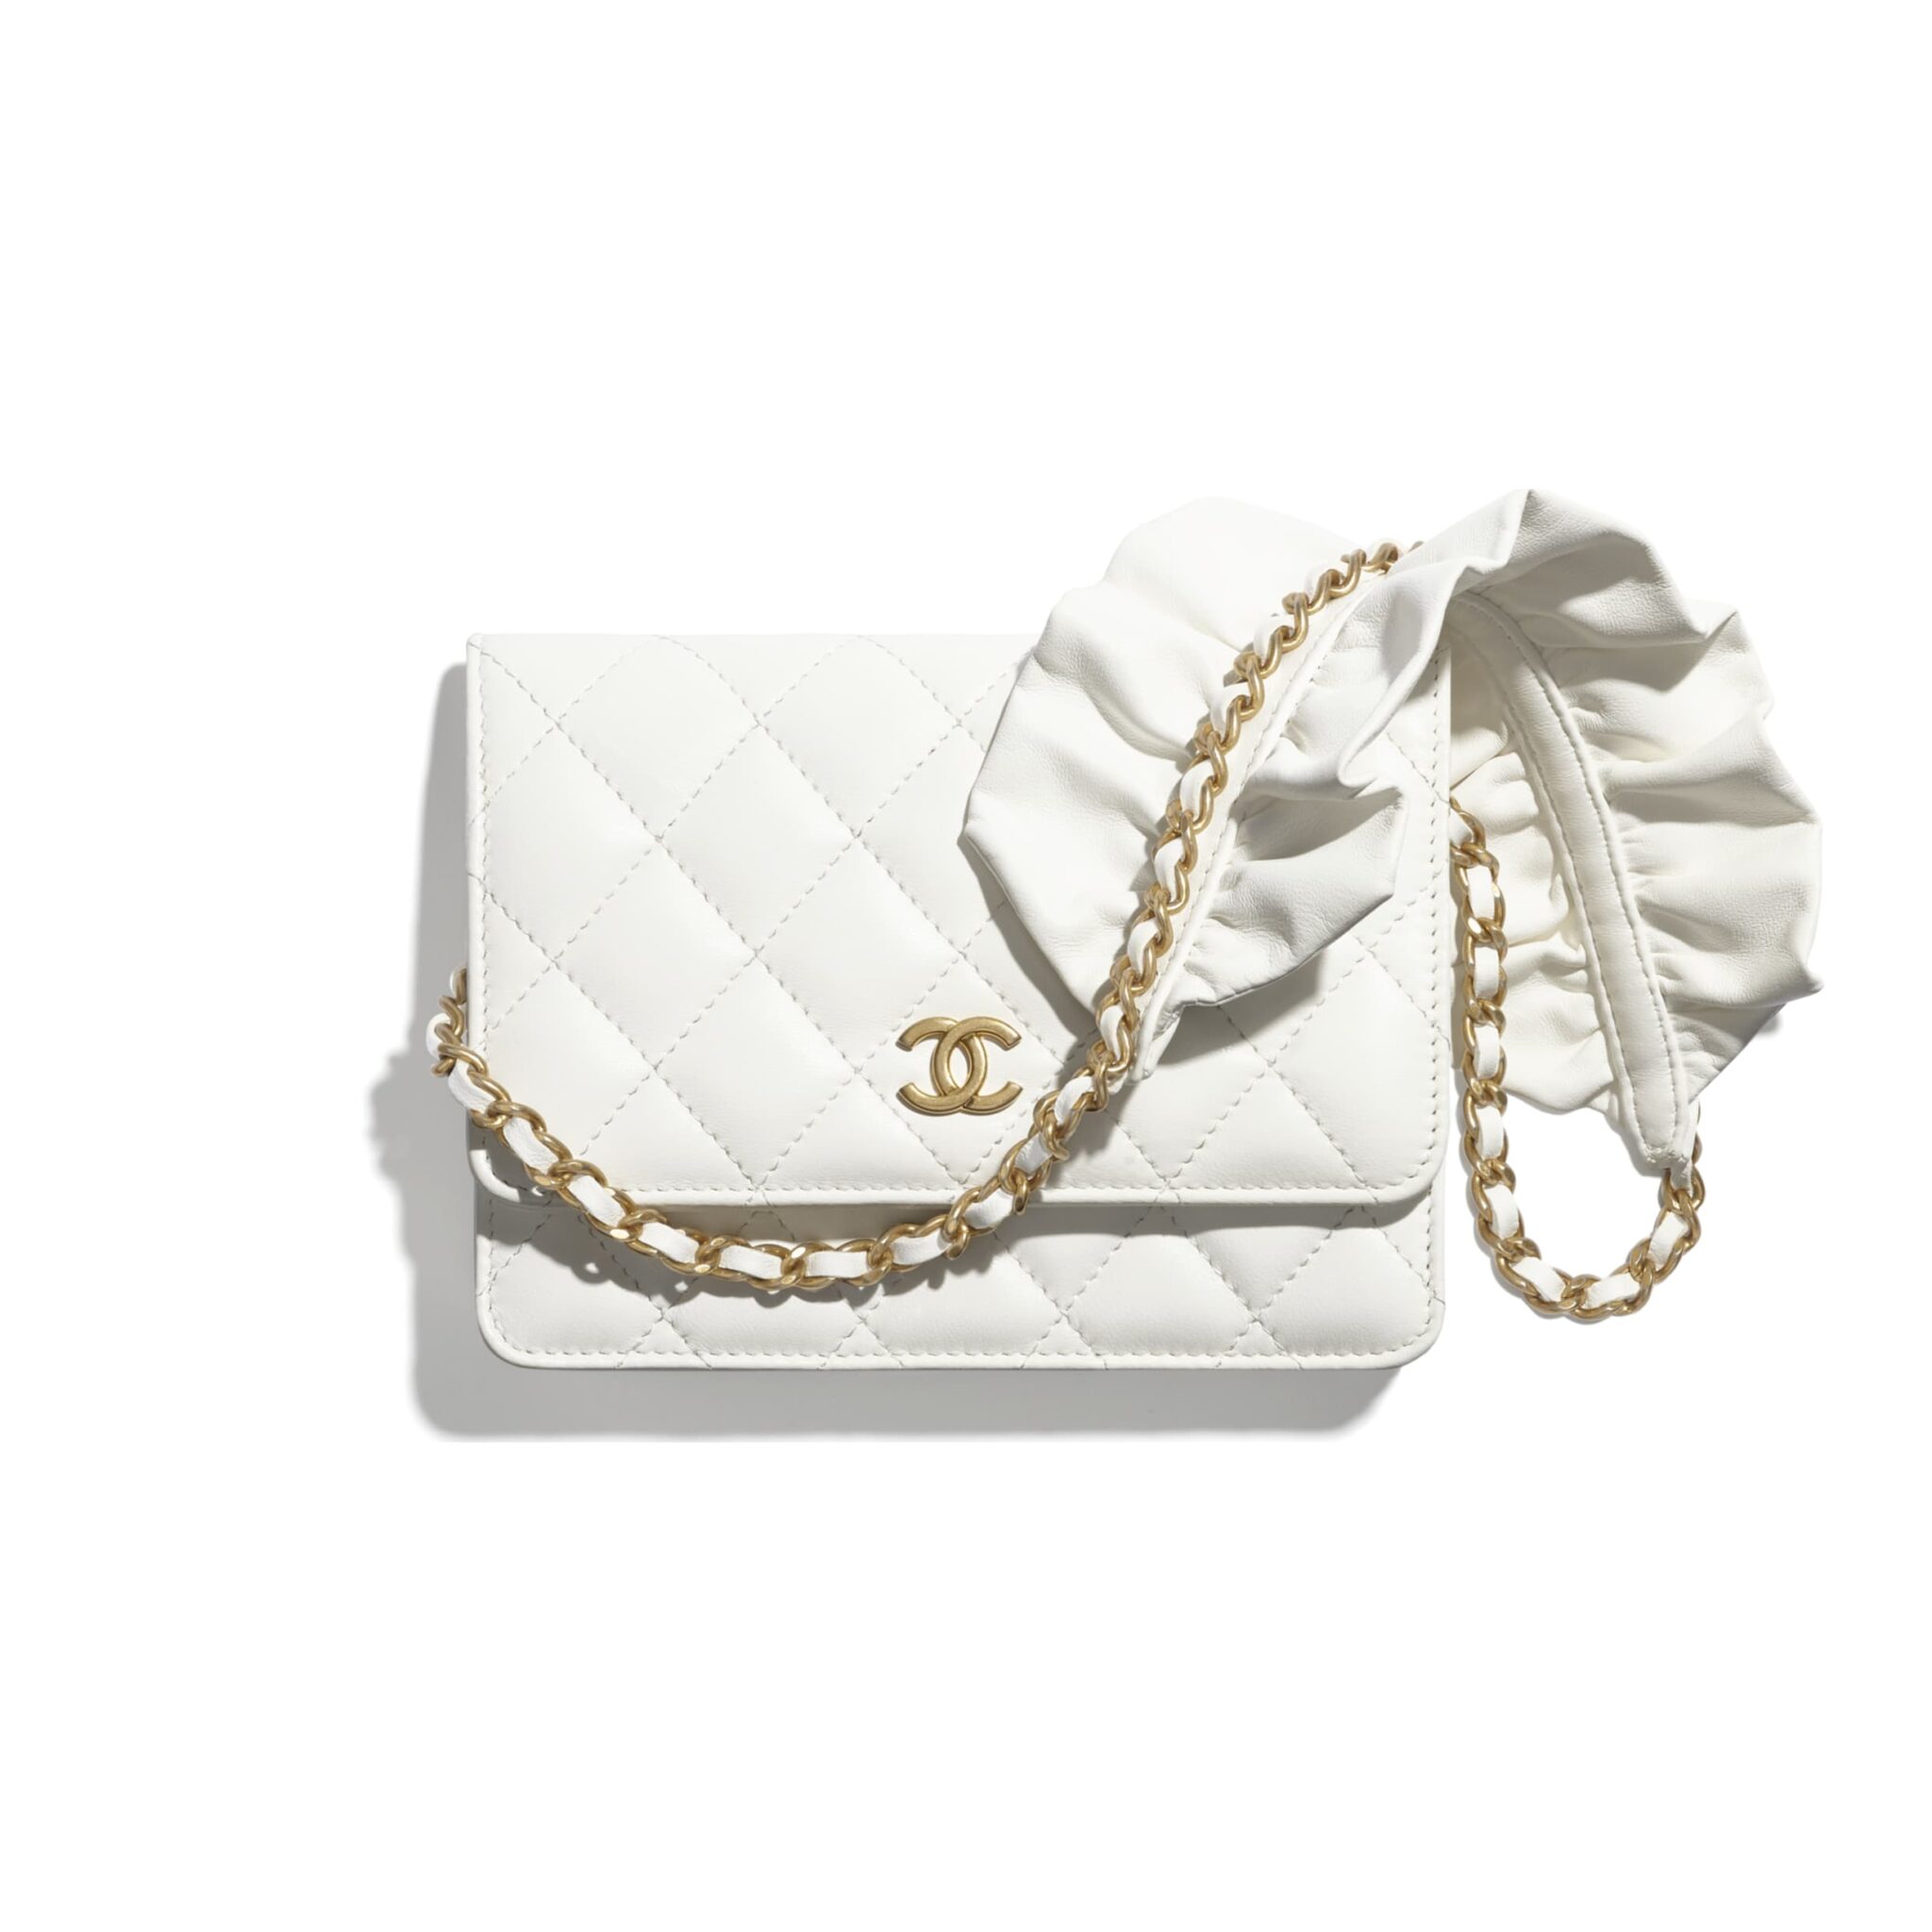 Chanel Fall Winter 2020 Classic Bag Collection Act 1